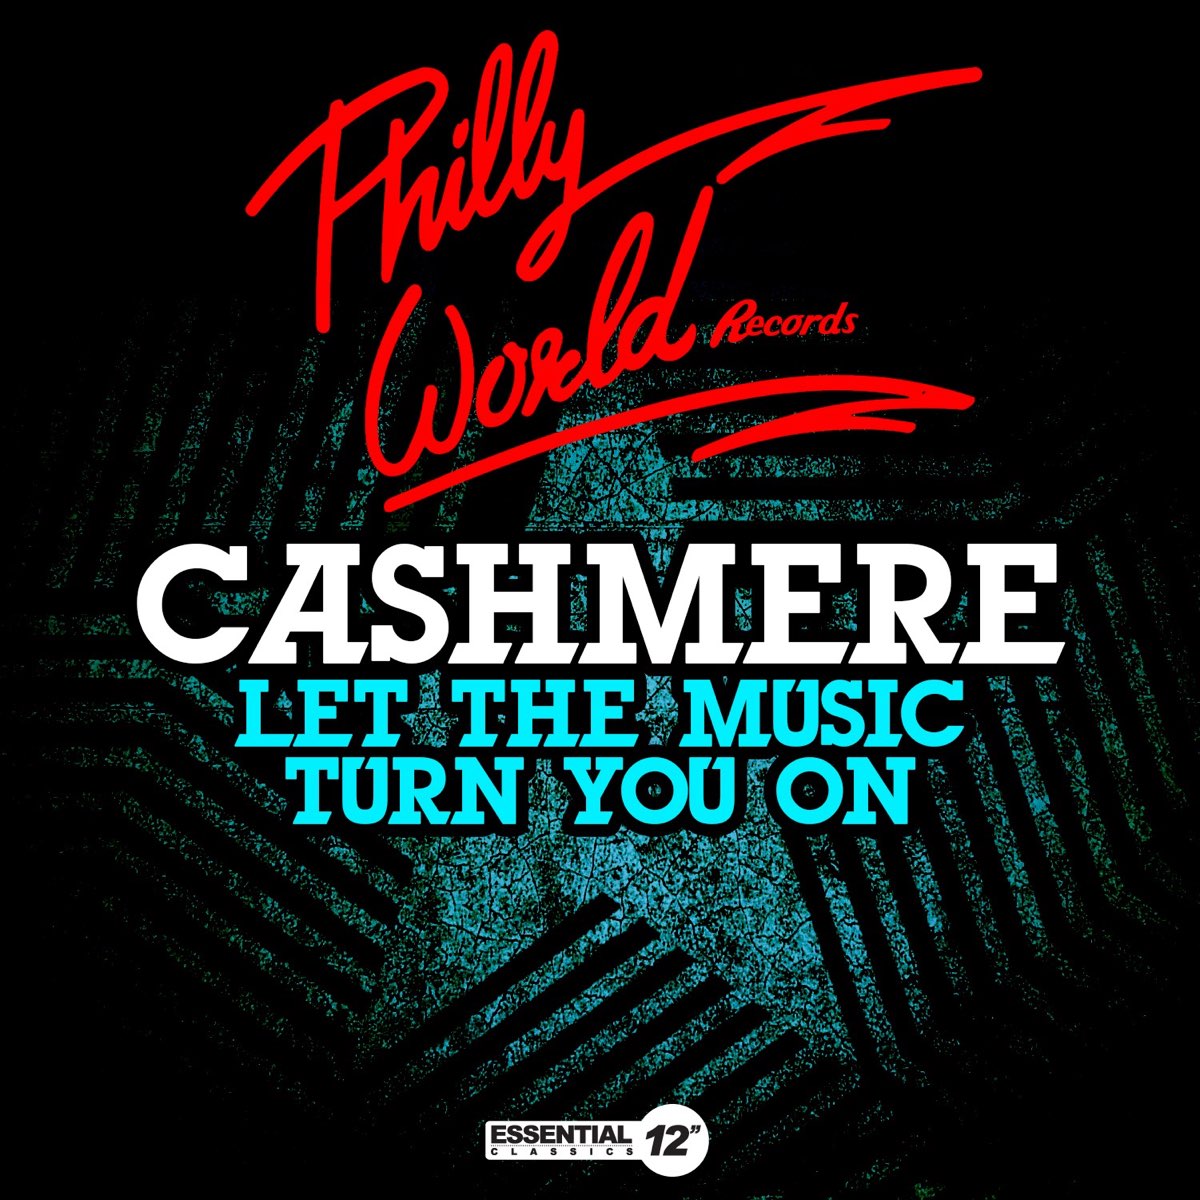 Lets Cashmere. Turn on the Music. Turn the Music loudly.